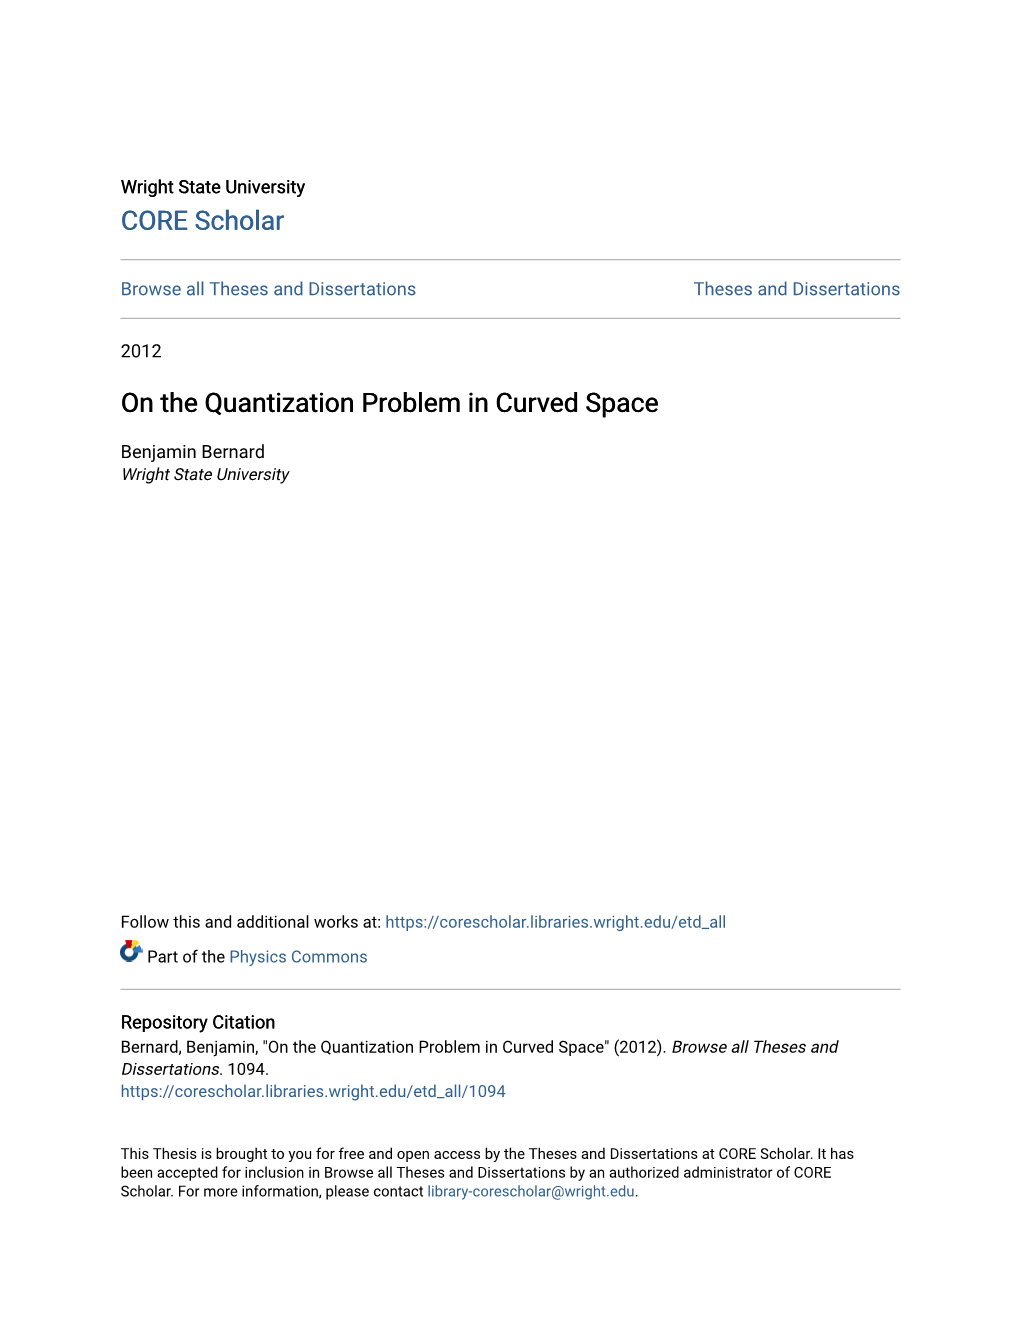 On the Quantization Problem in Curved Space